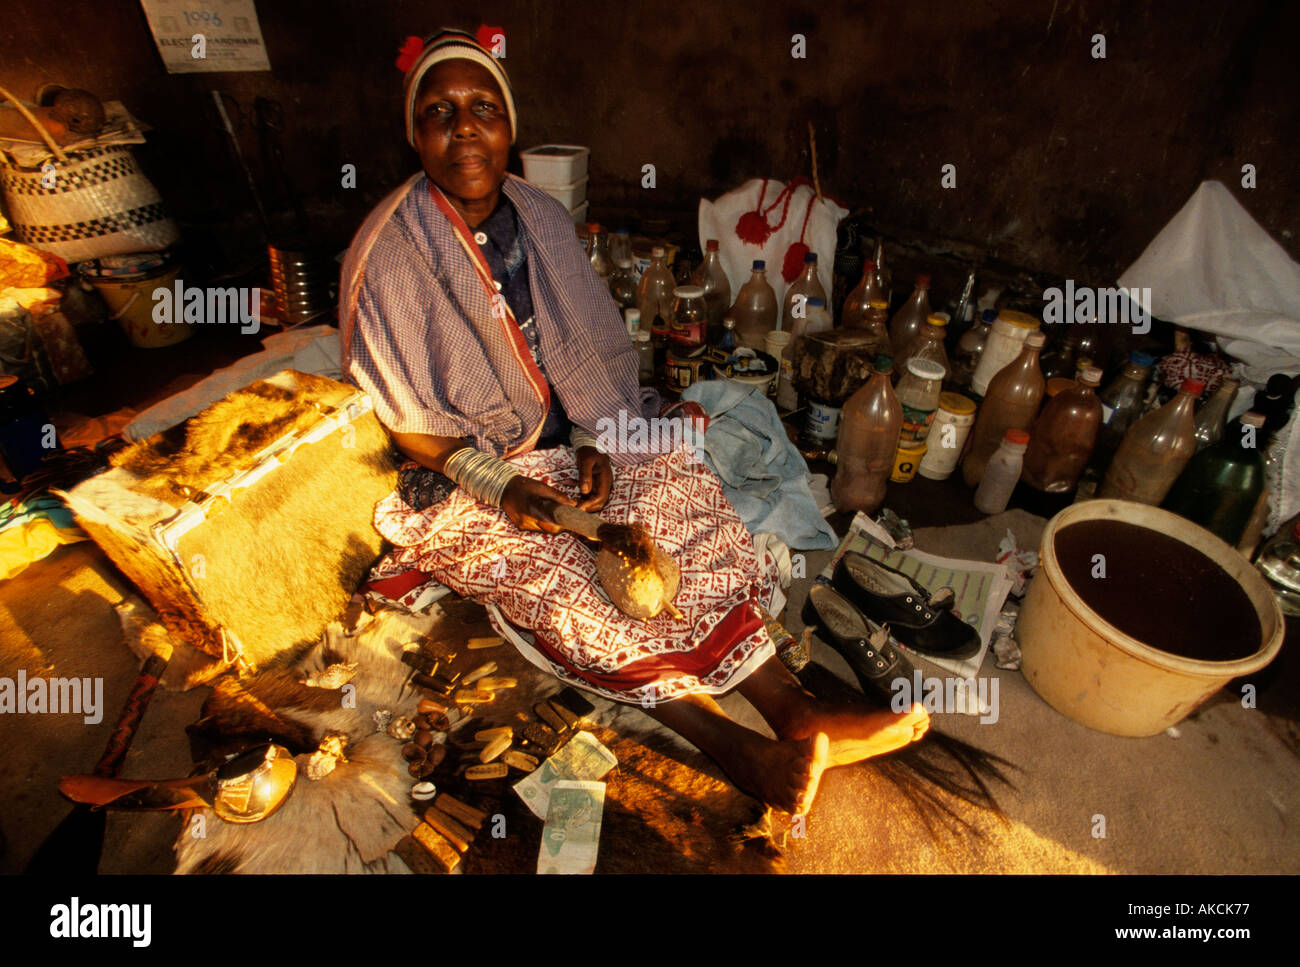 A sangoma witch doctor South Africa Stock Photo